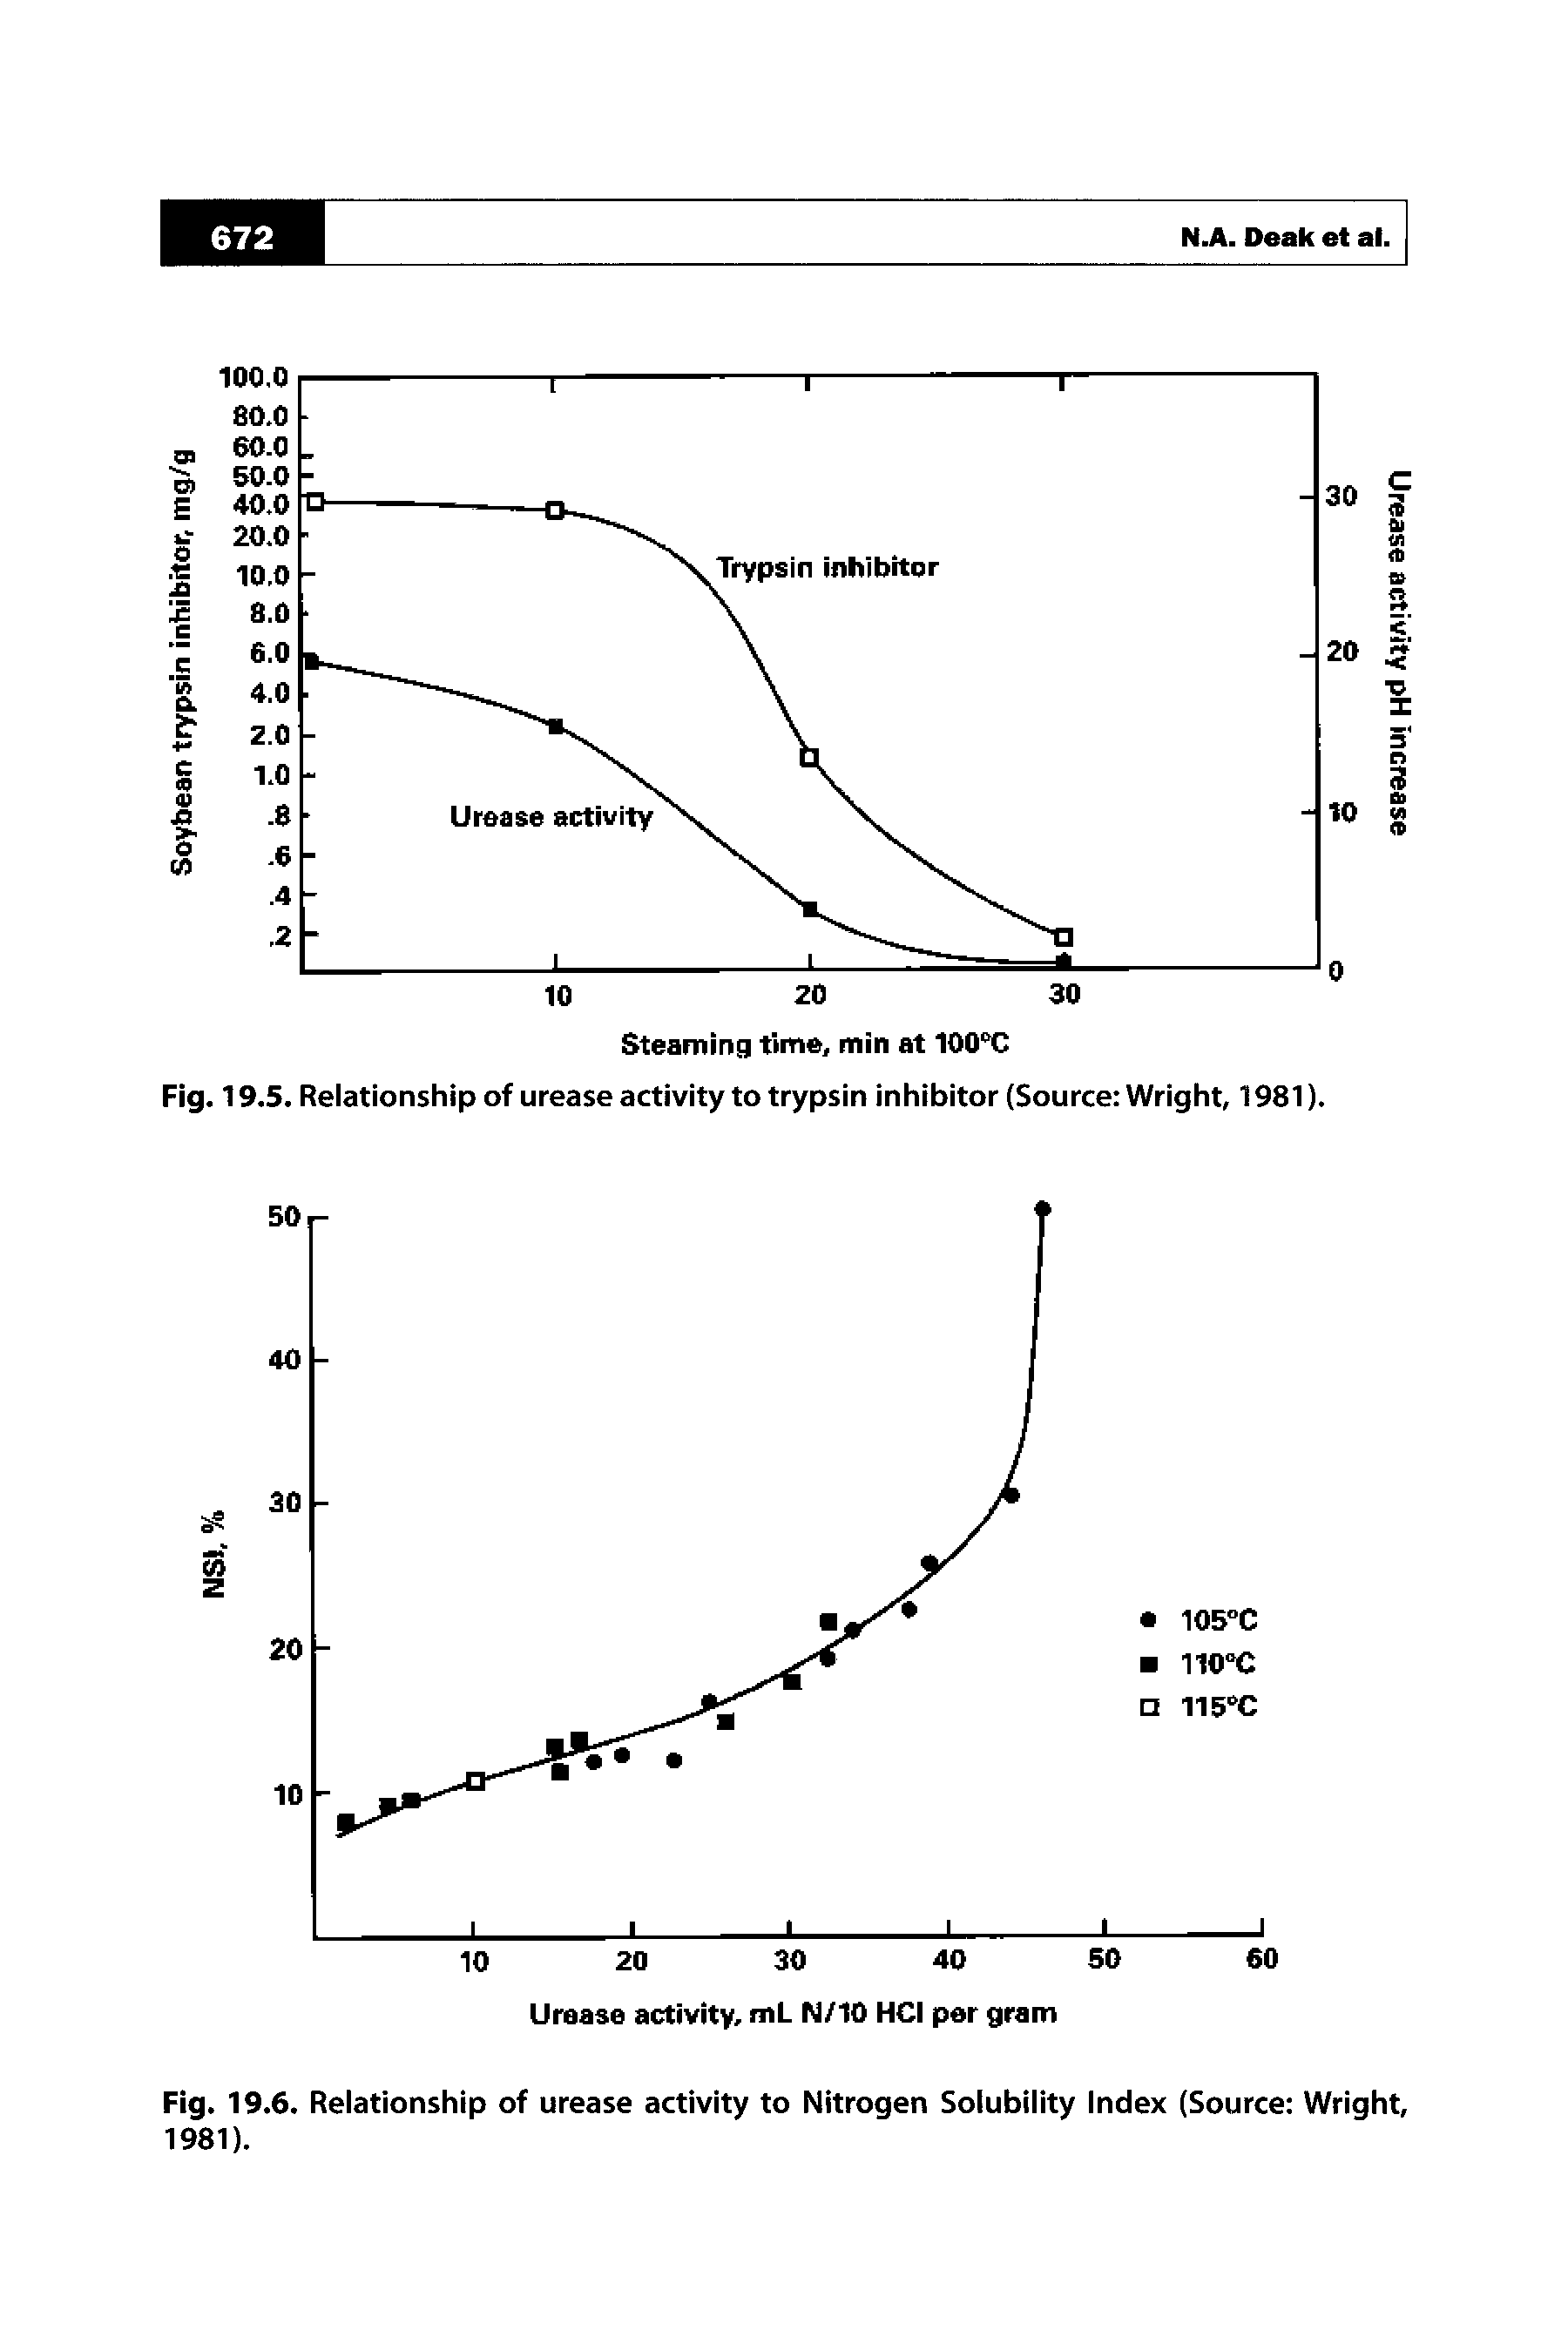 Fig. 19.6. Relationship of urease activity to Nitrogen Solubility Index (Source Wright, 1981).